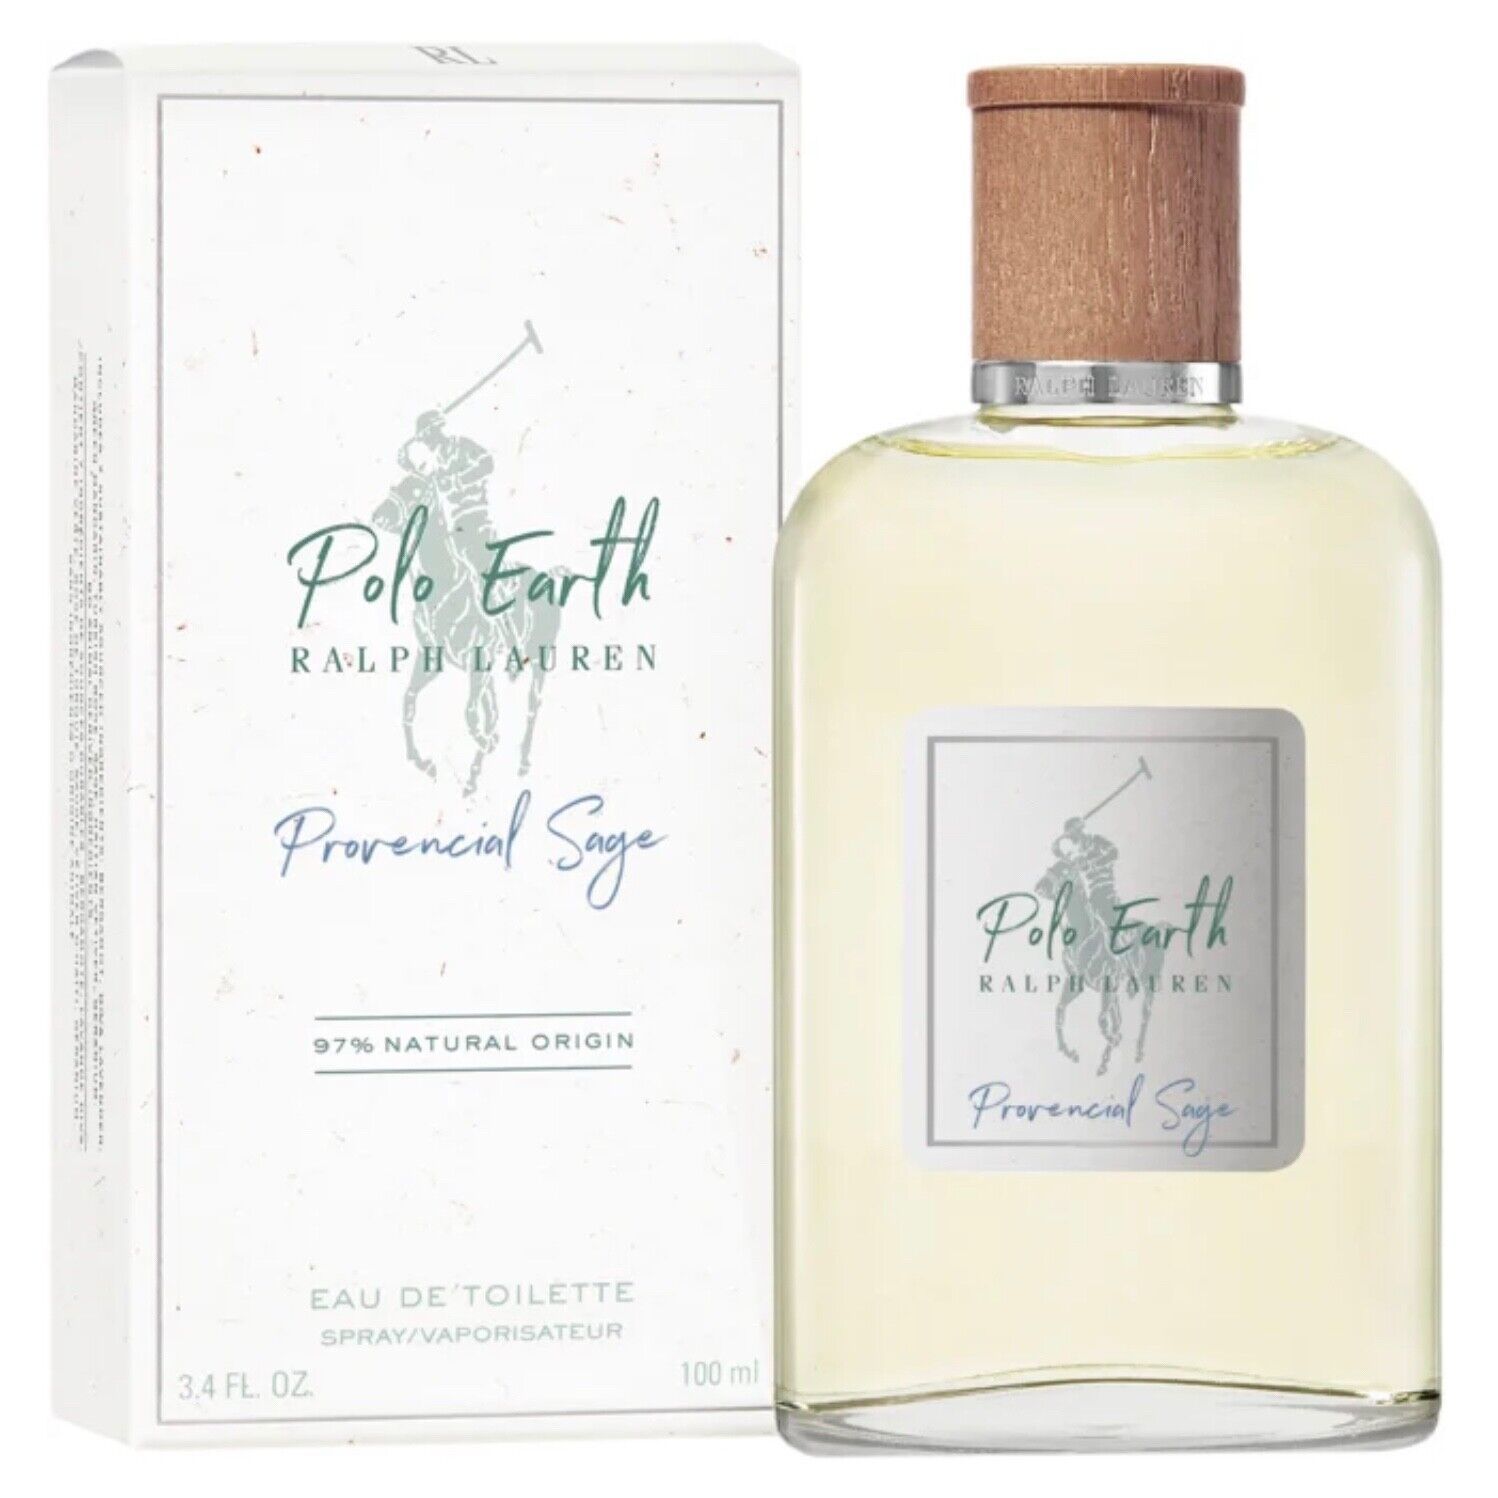 Primary image for Ralph Lauren Polo Earth Provencial Sage EDT Spray 3.4 OZ Brand New free ship